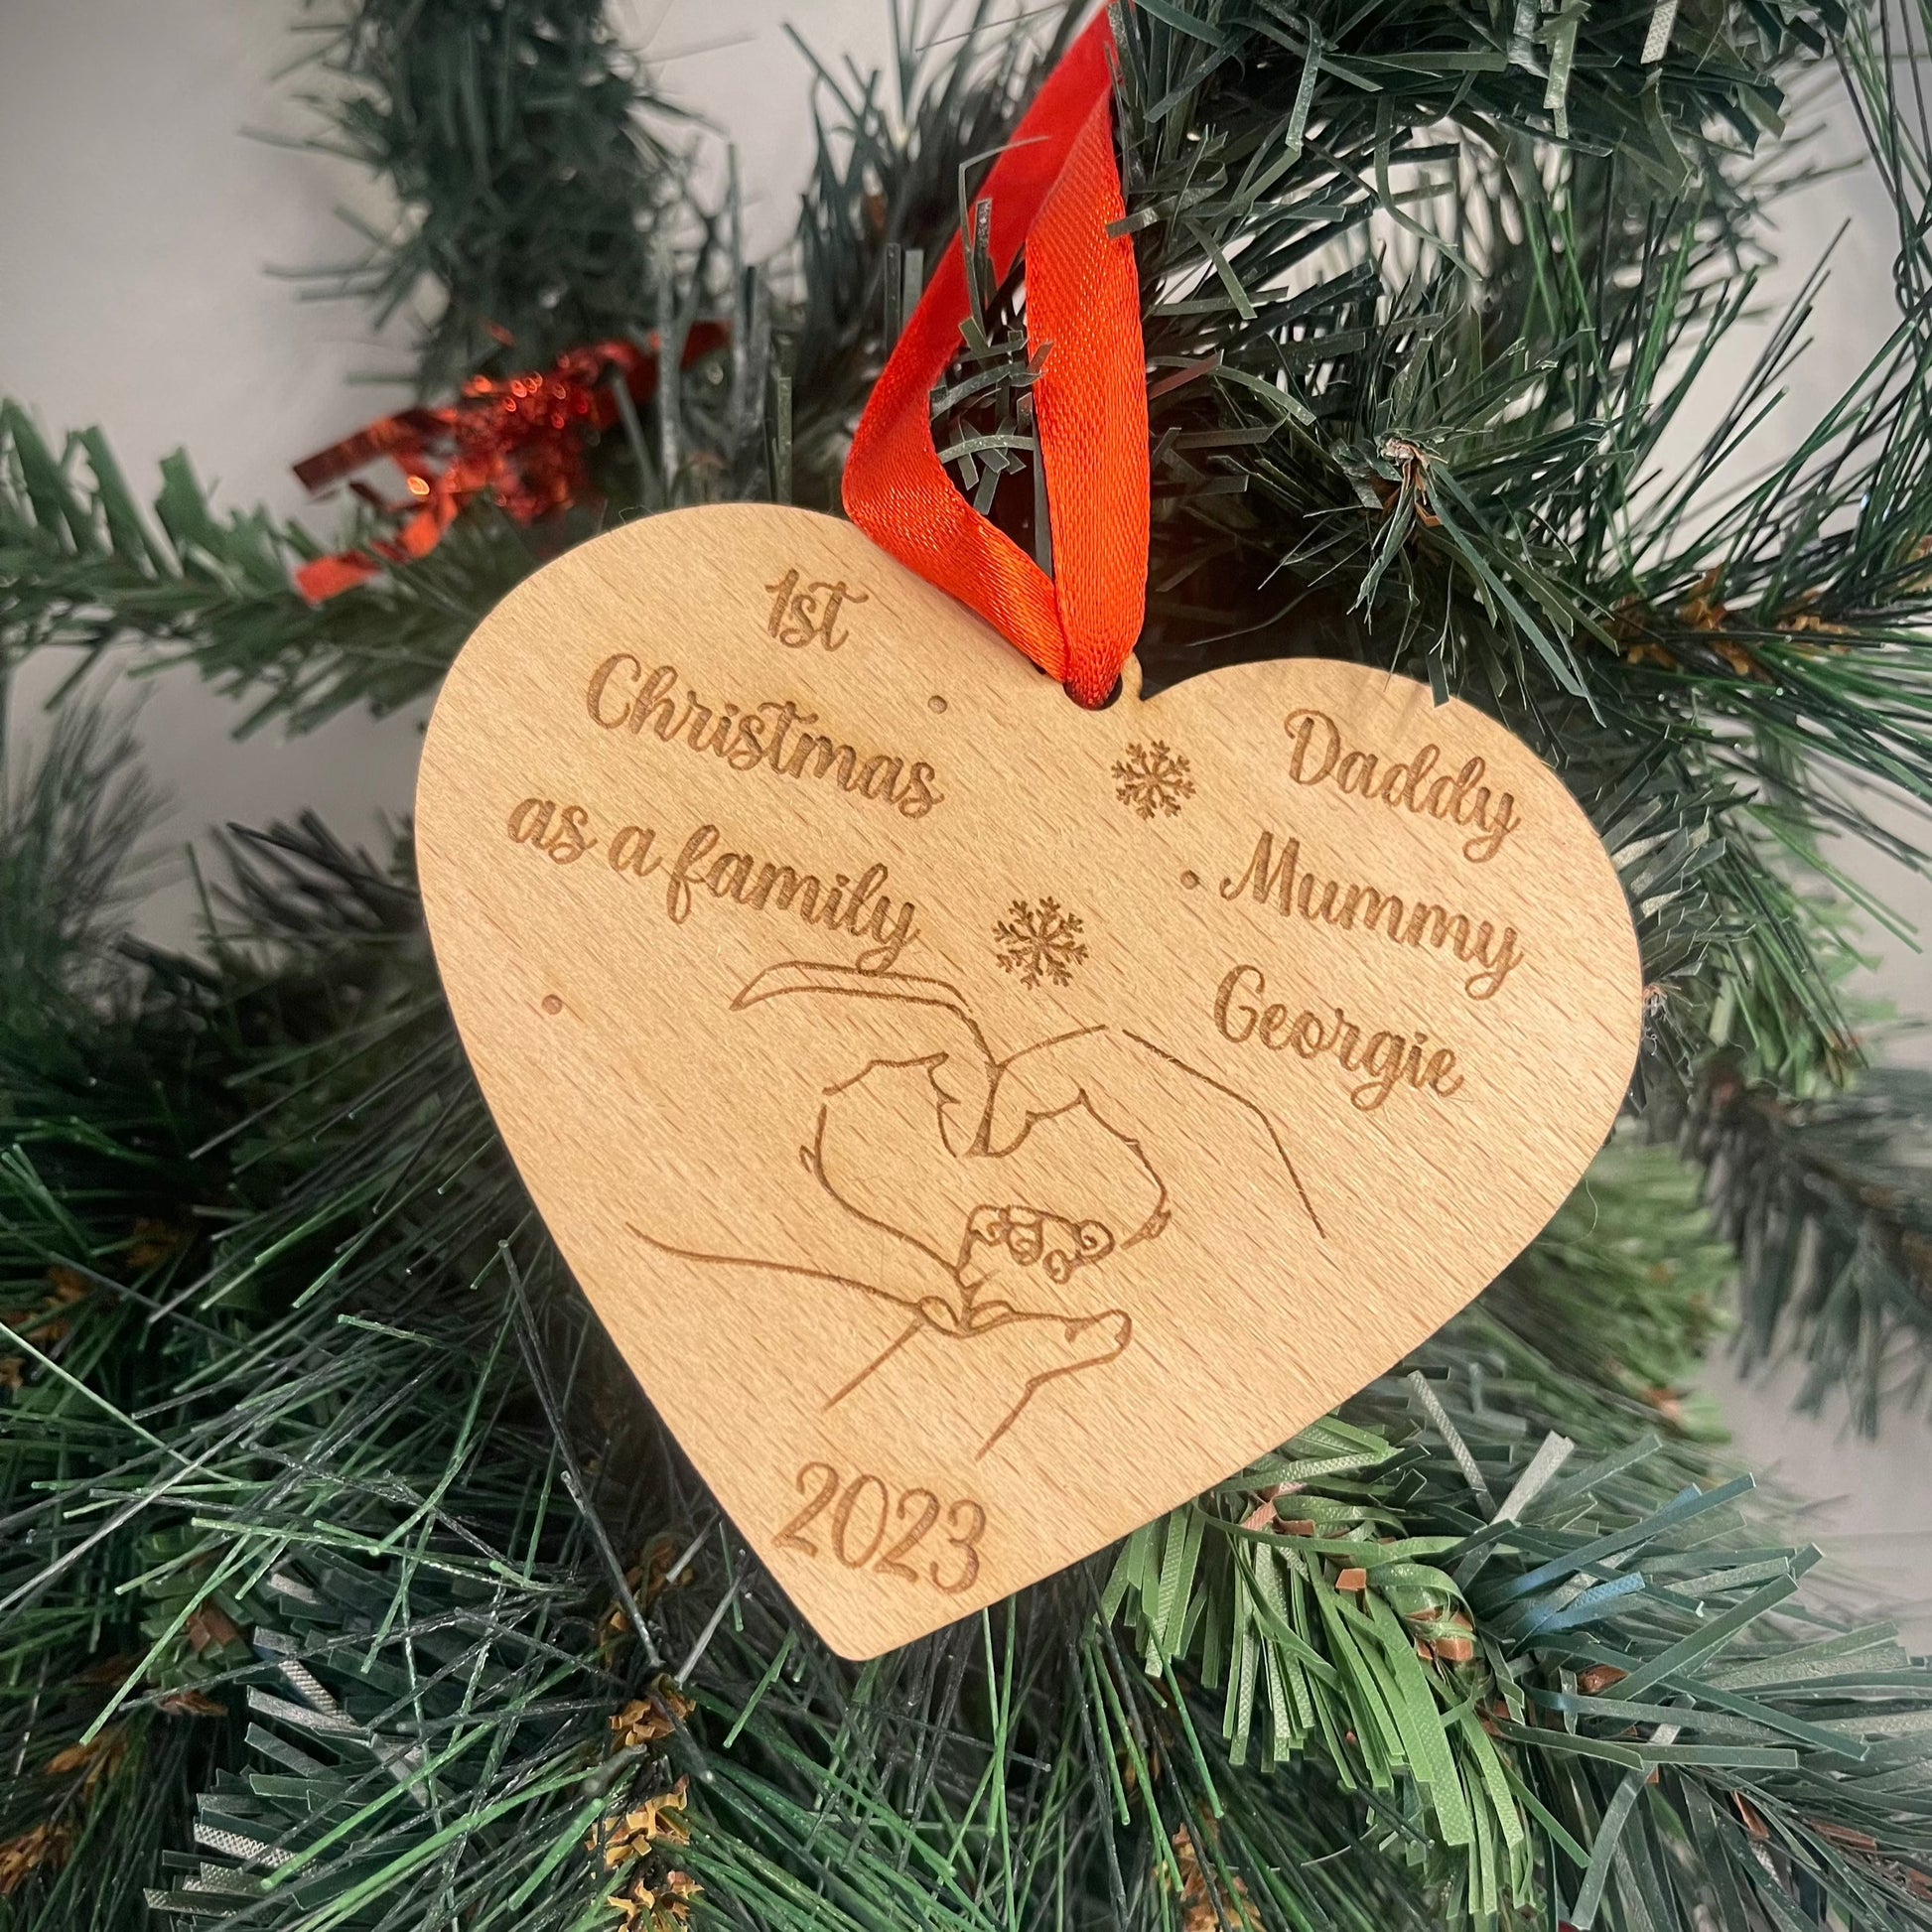 Personalized Wooden Heart Christmas Bauble: Heart-shaped beech veneer wood ornament engraved with '1st Christmas as a Family' and personalized names. Features intertwined hands, year, and red ribbon. Festive and sentimental addition to your holiday tree.